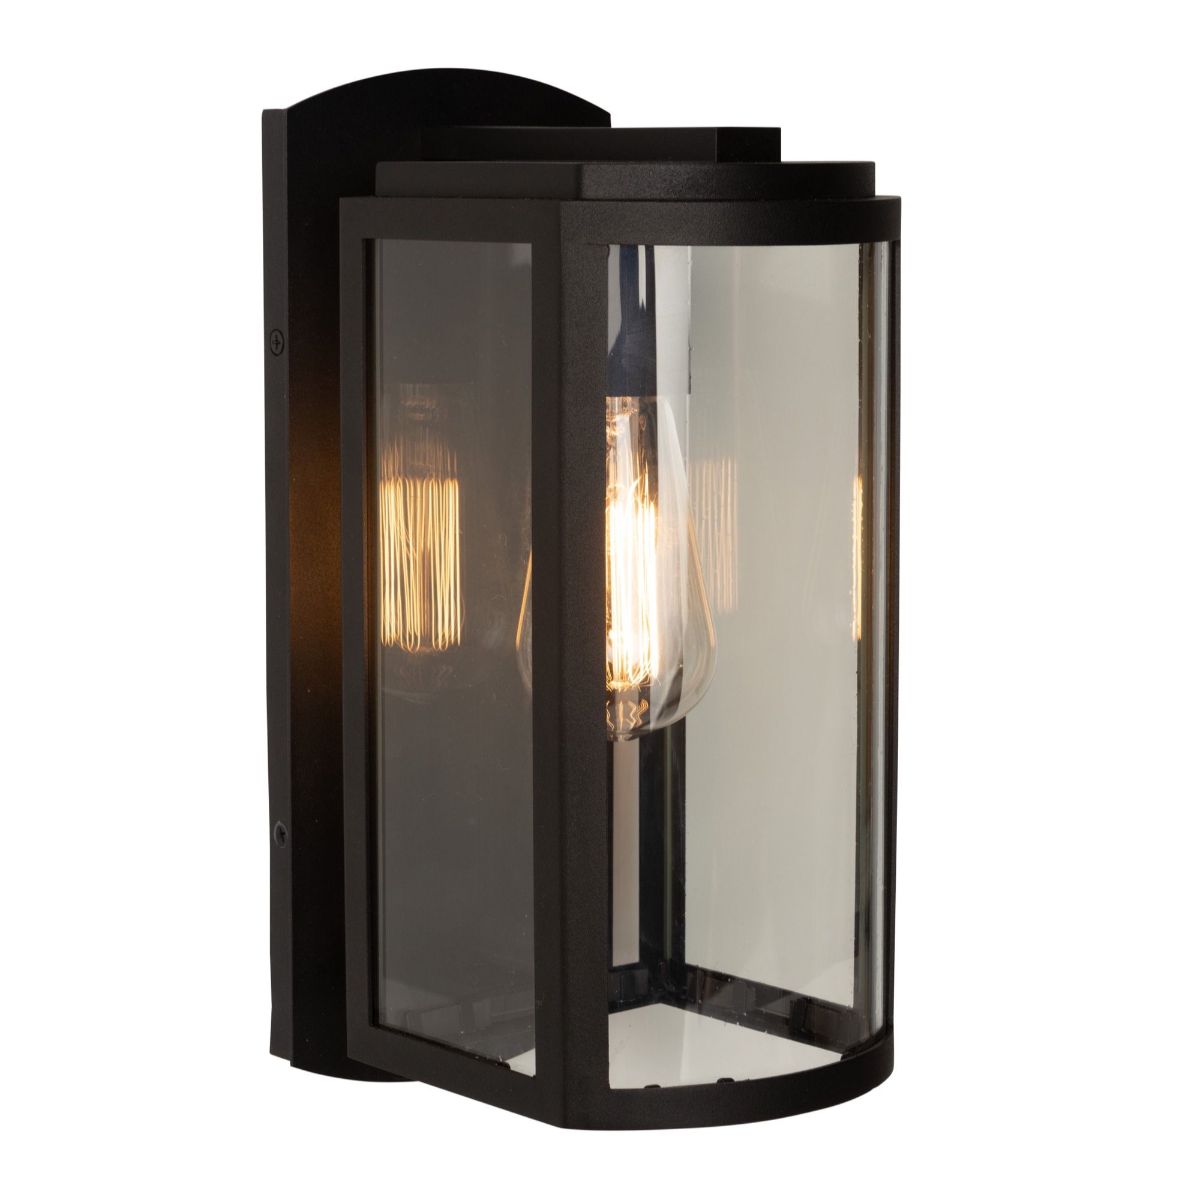 Lakewood 13 In. Outdoor Wall Light Matte Black Finish